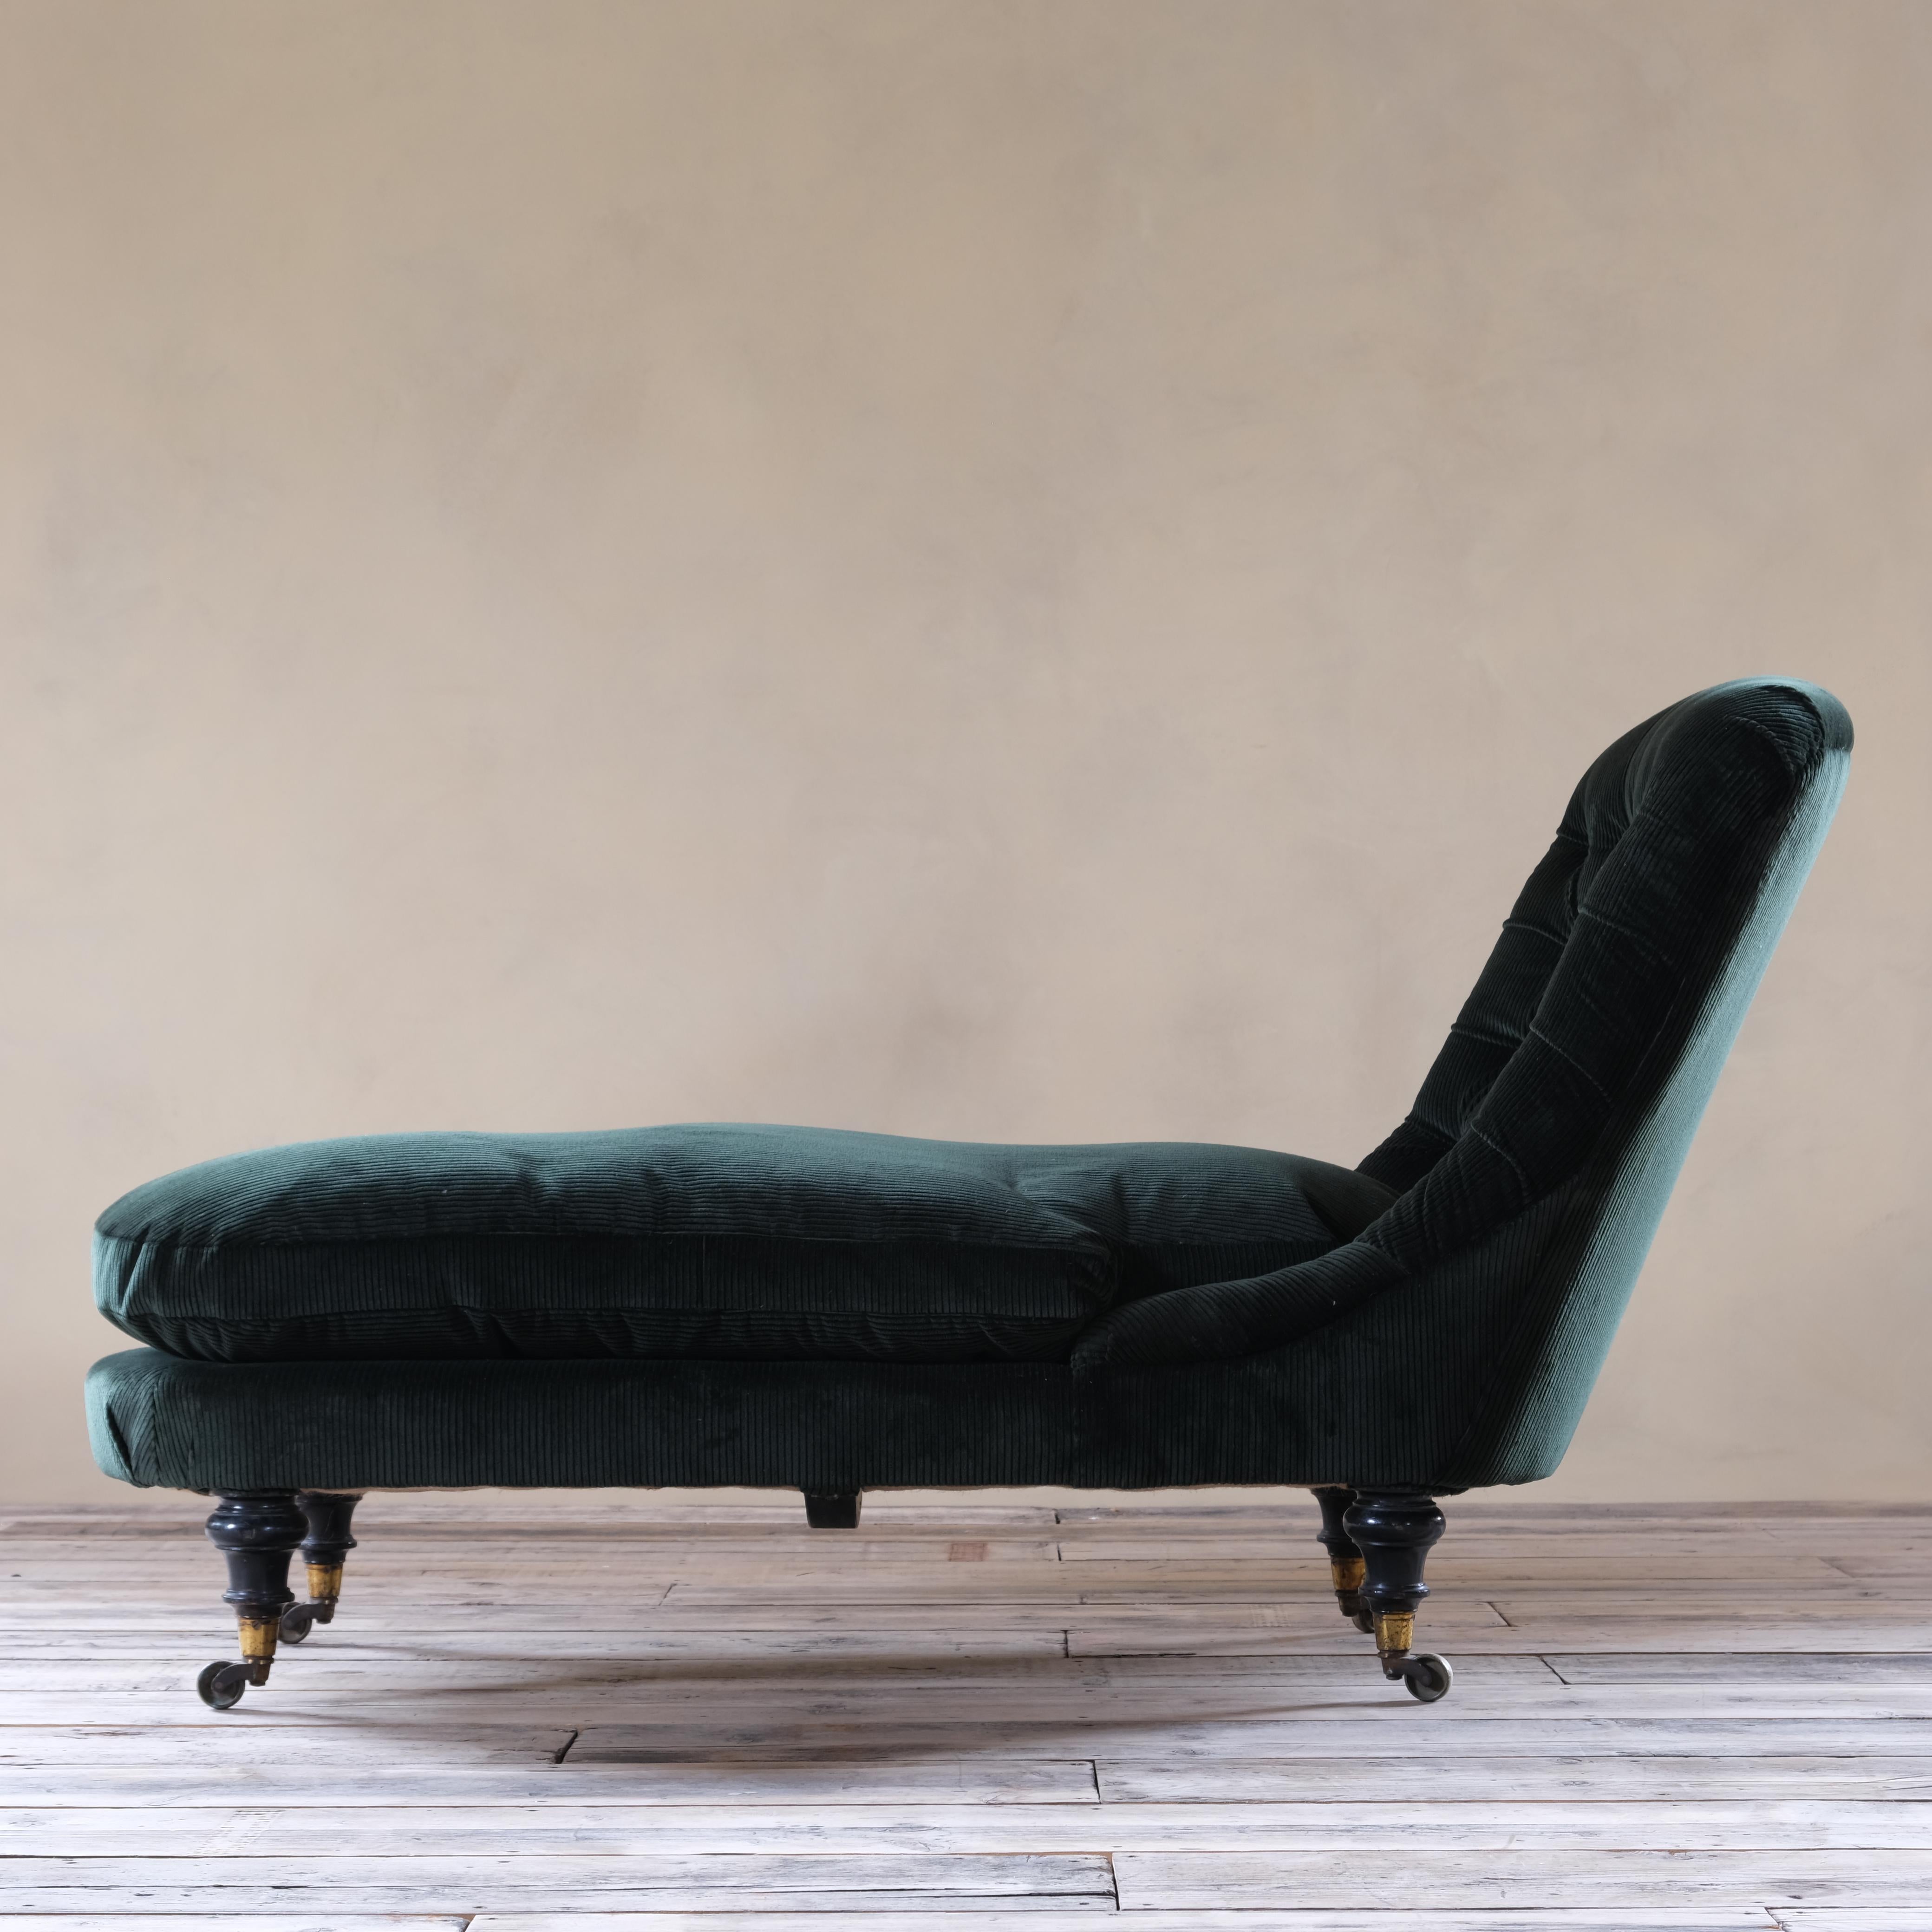 A mid 19th century daybed by Howard and Sons - London. Raised on 4 ebonized turned walnut legs and the original gilt brass Cope & Collinson brass casters.
Upholstered in Forest green jumbo cord by Rose Uniacke with a plum feather filled